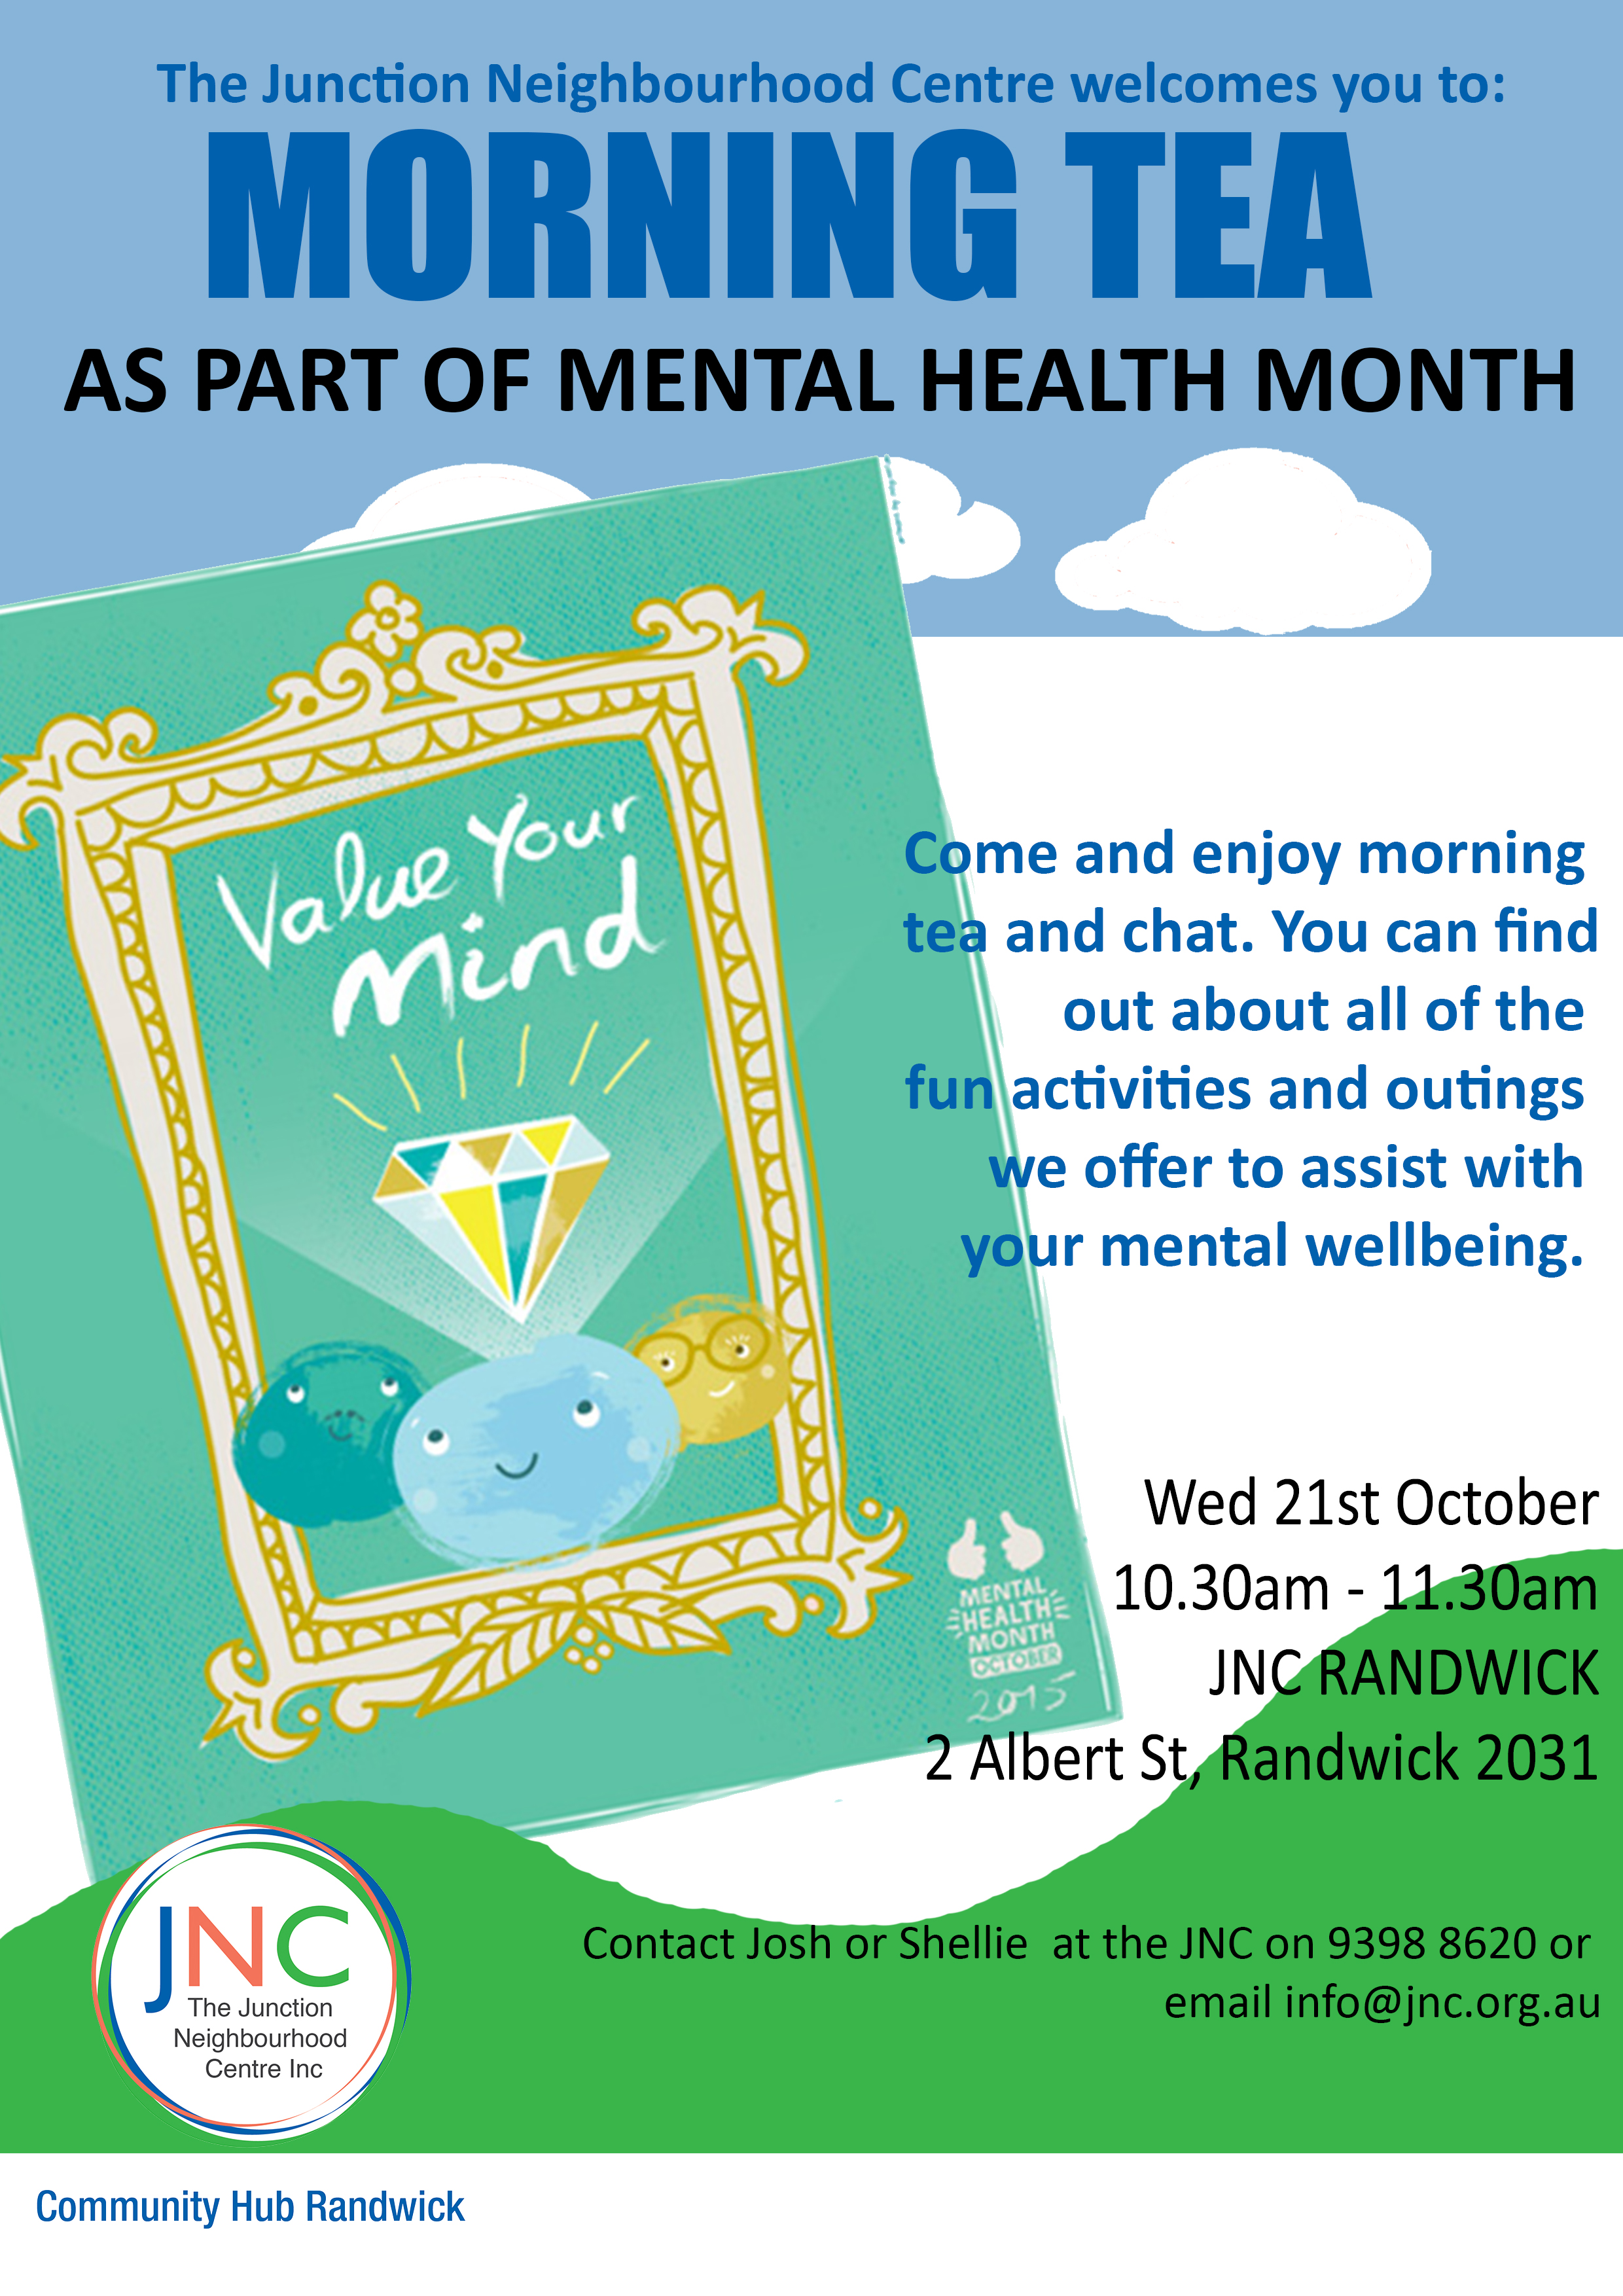 The JNC Randwick is hosting a delicious morning tea as part of Mental Health Month on Wed 21 Oct 2015.